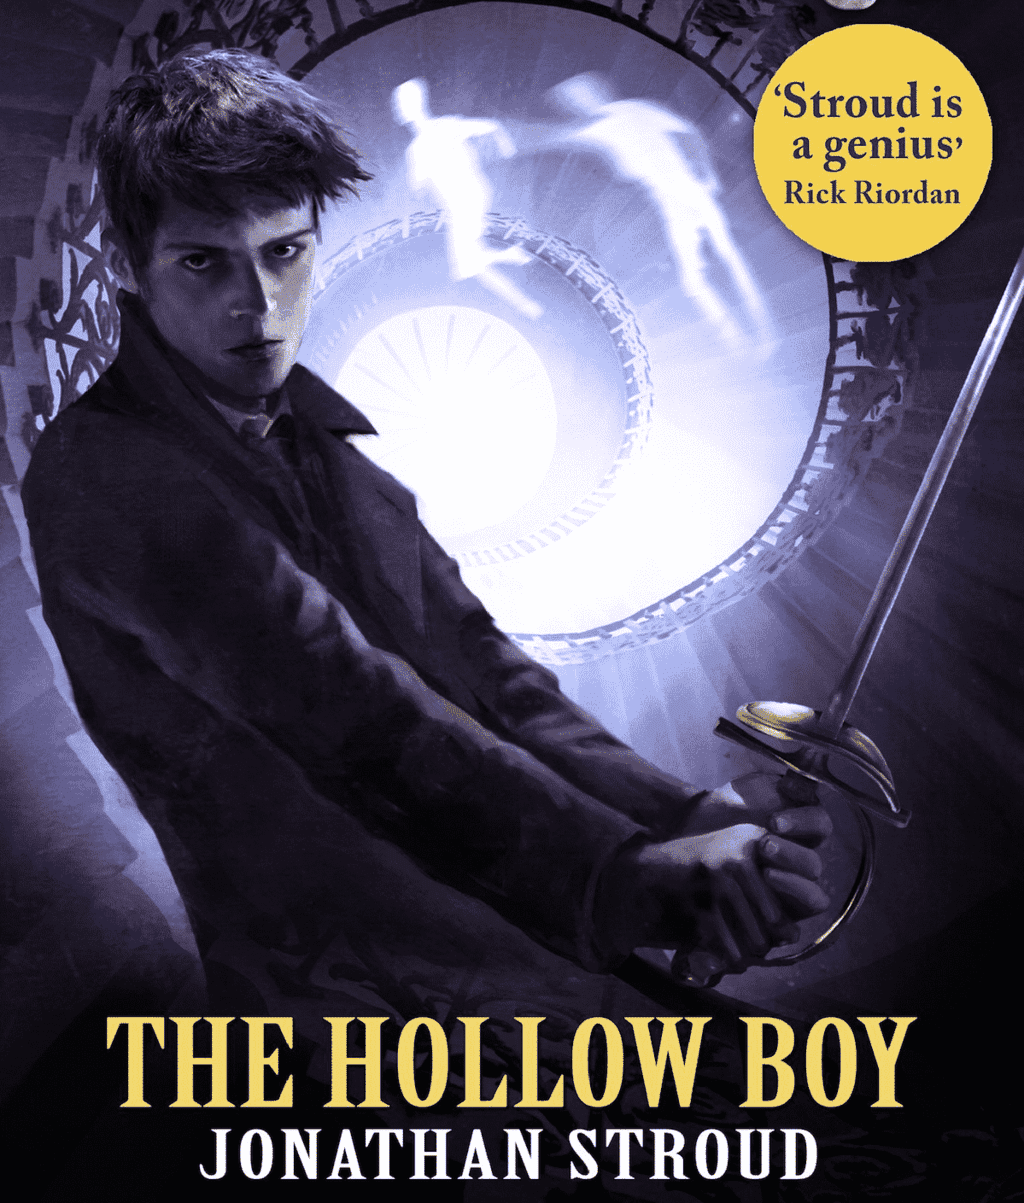 The Hollow Boy by Jonathan Stroud